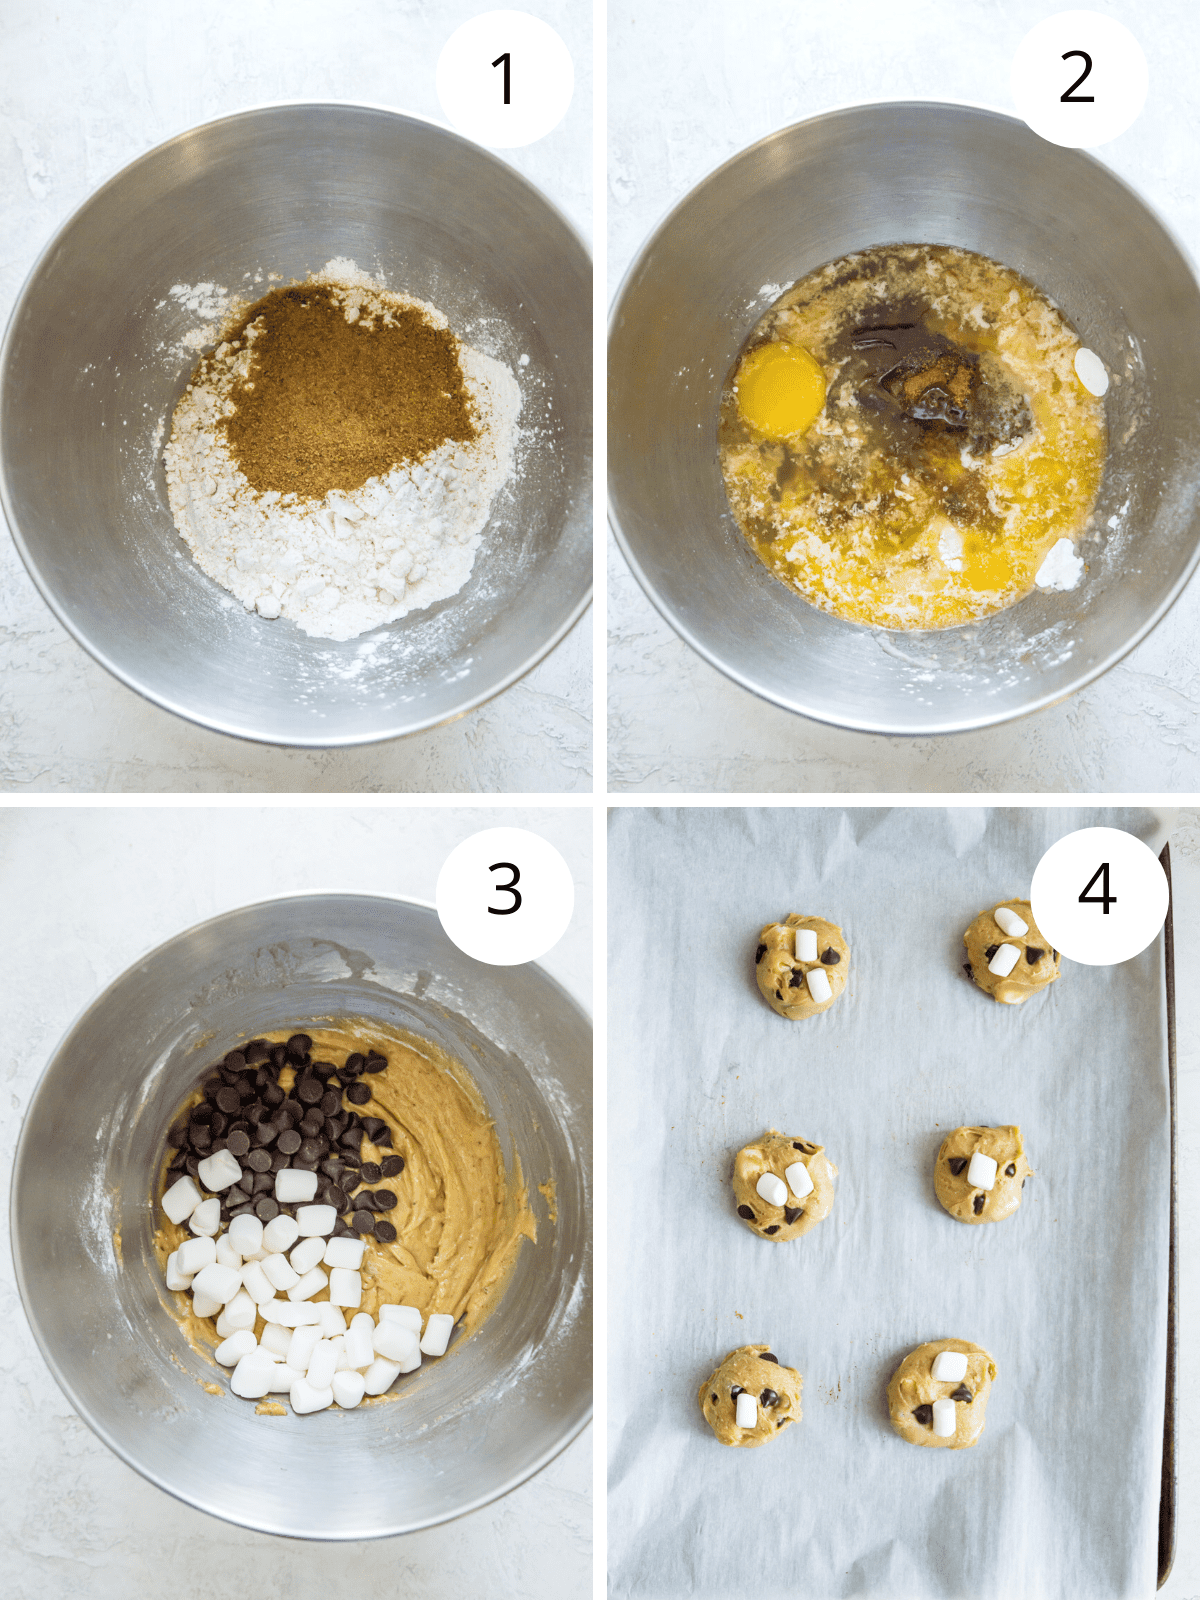 Step by step directions for making chocolate chip marshmallow cookies.